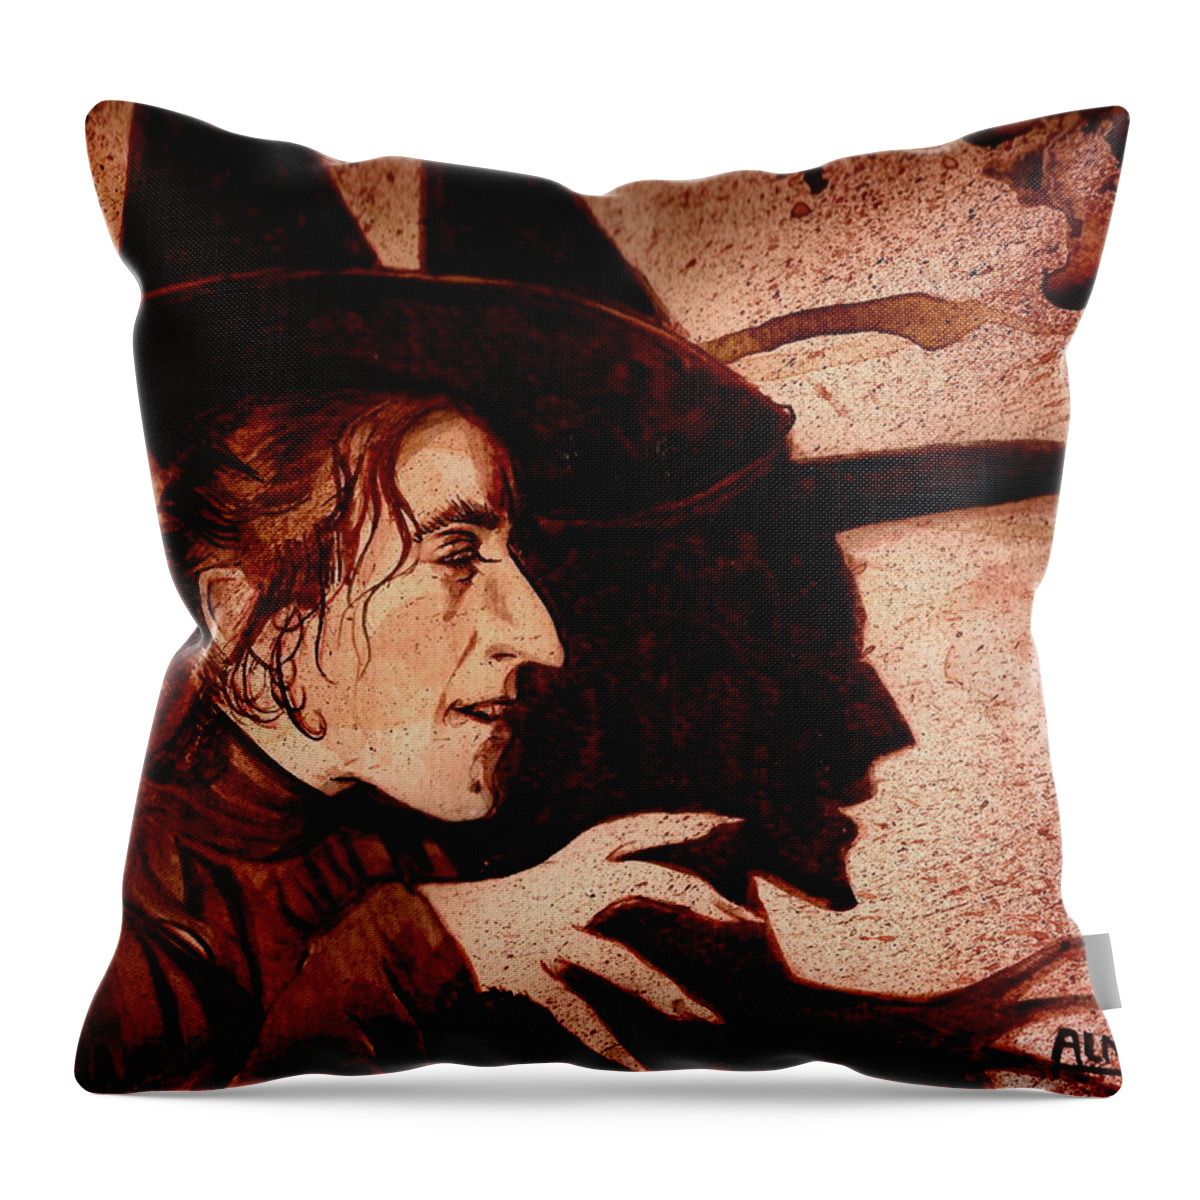 Ryan Almighty Throw Pillow featuring the painting WIZARD OF OZ WICKED WITCH - dry blood by Ryan Almighty